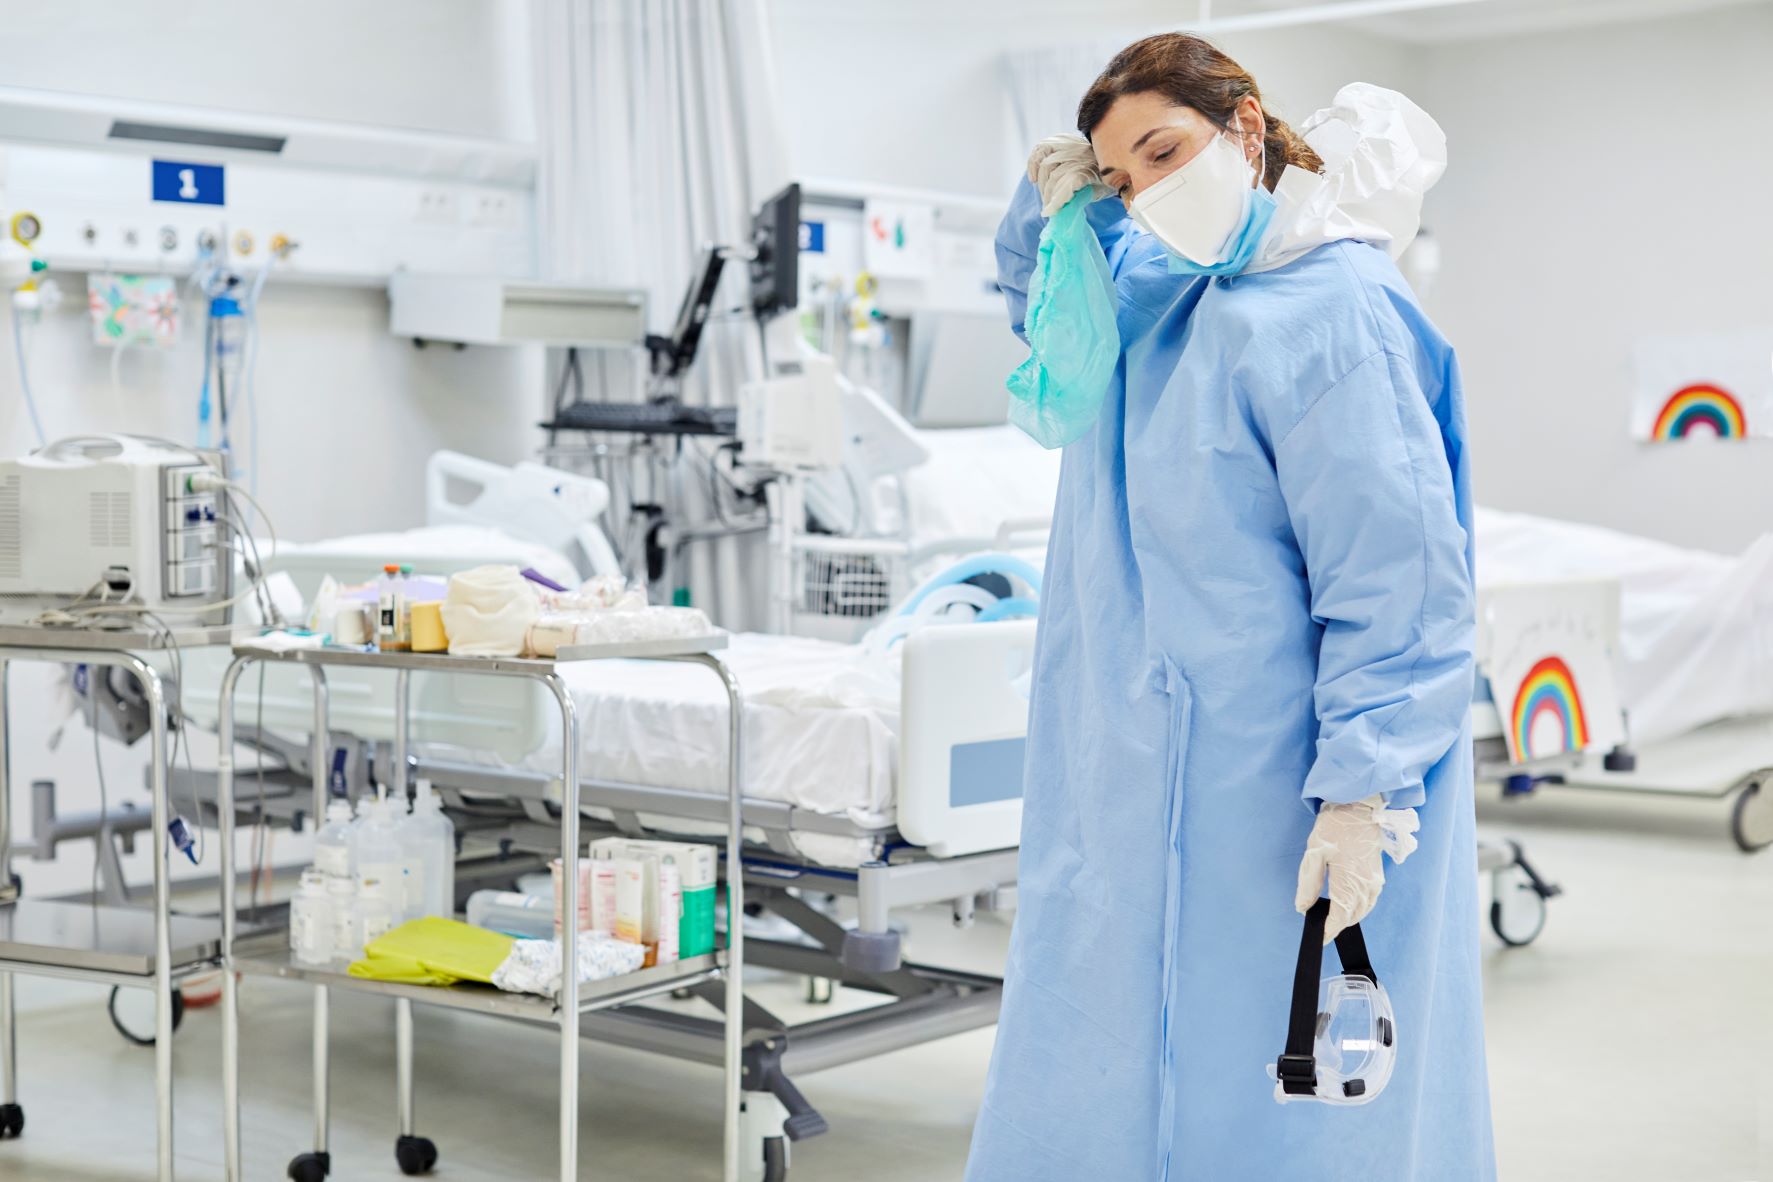 Exhausted nurse in PPE in hospital setting